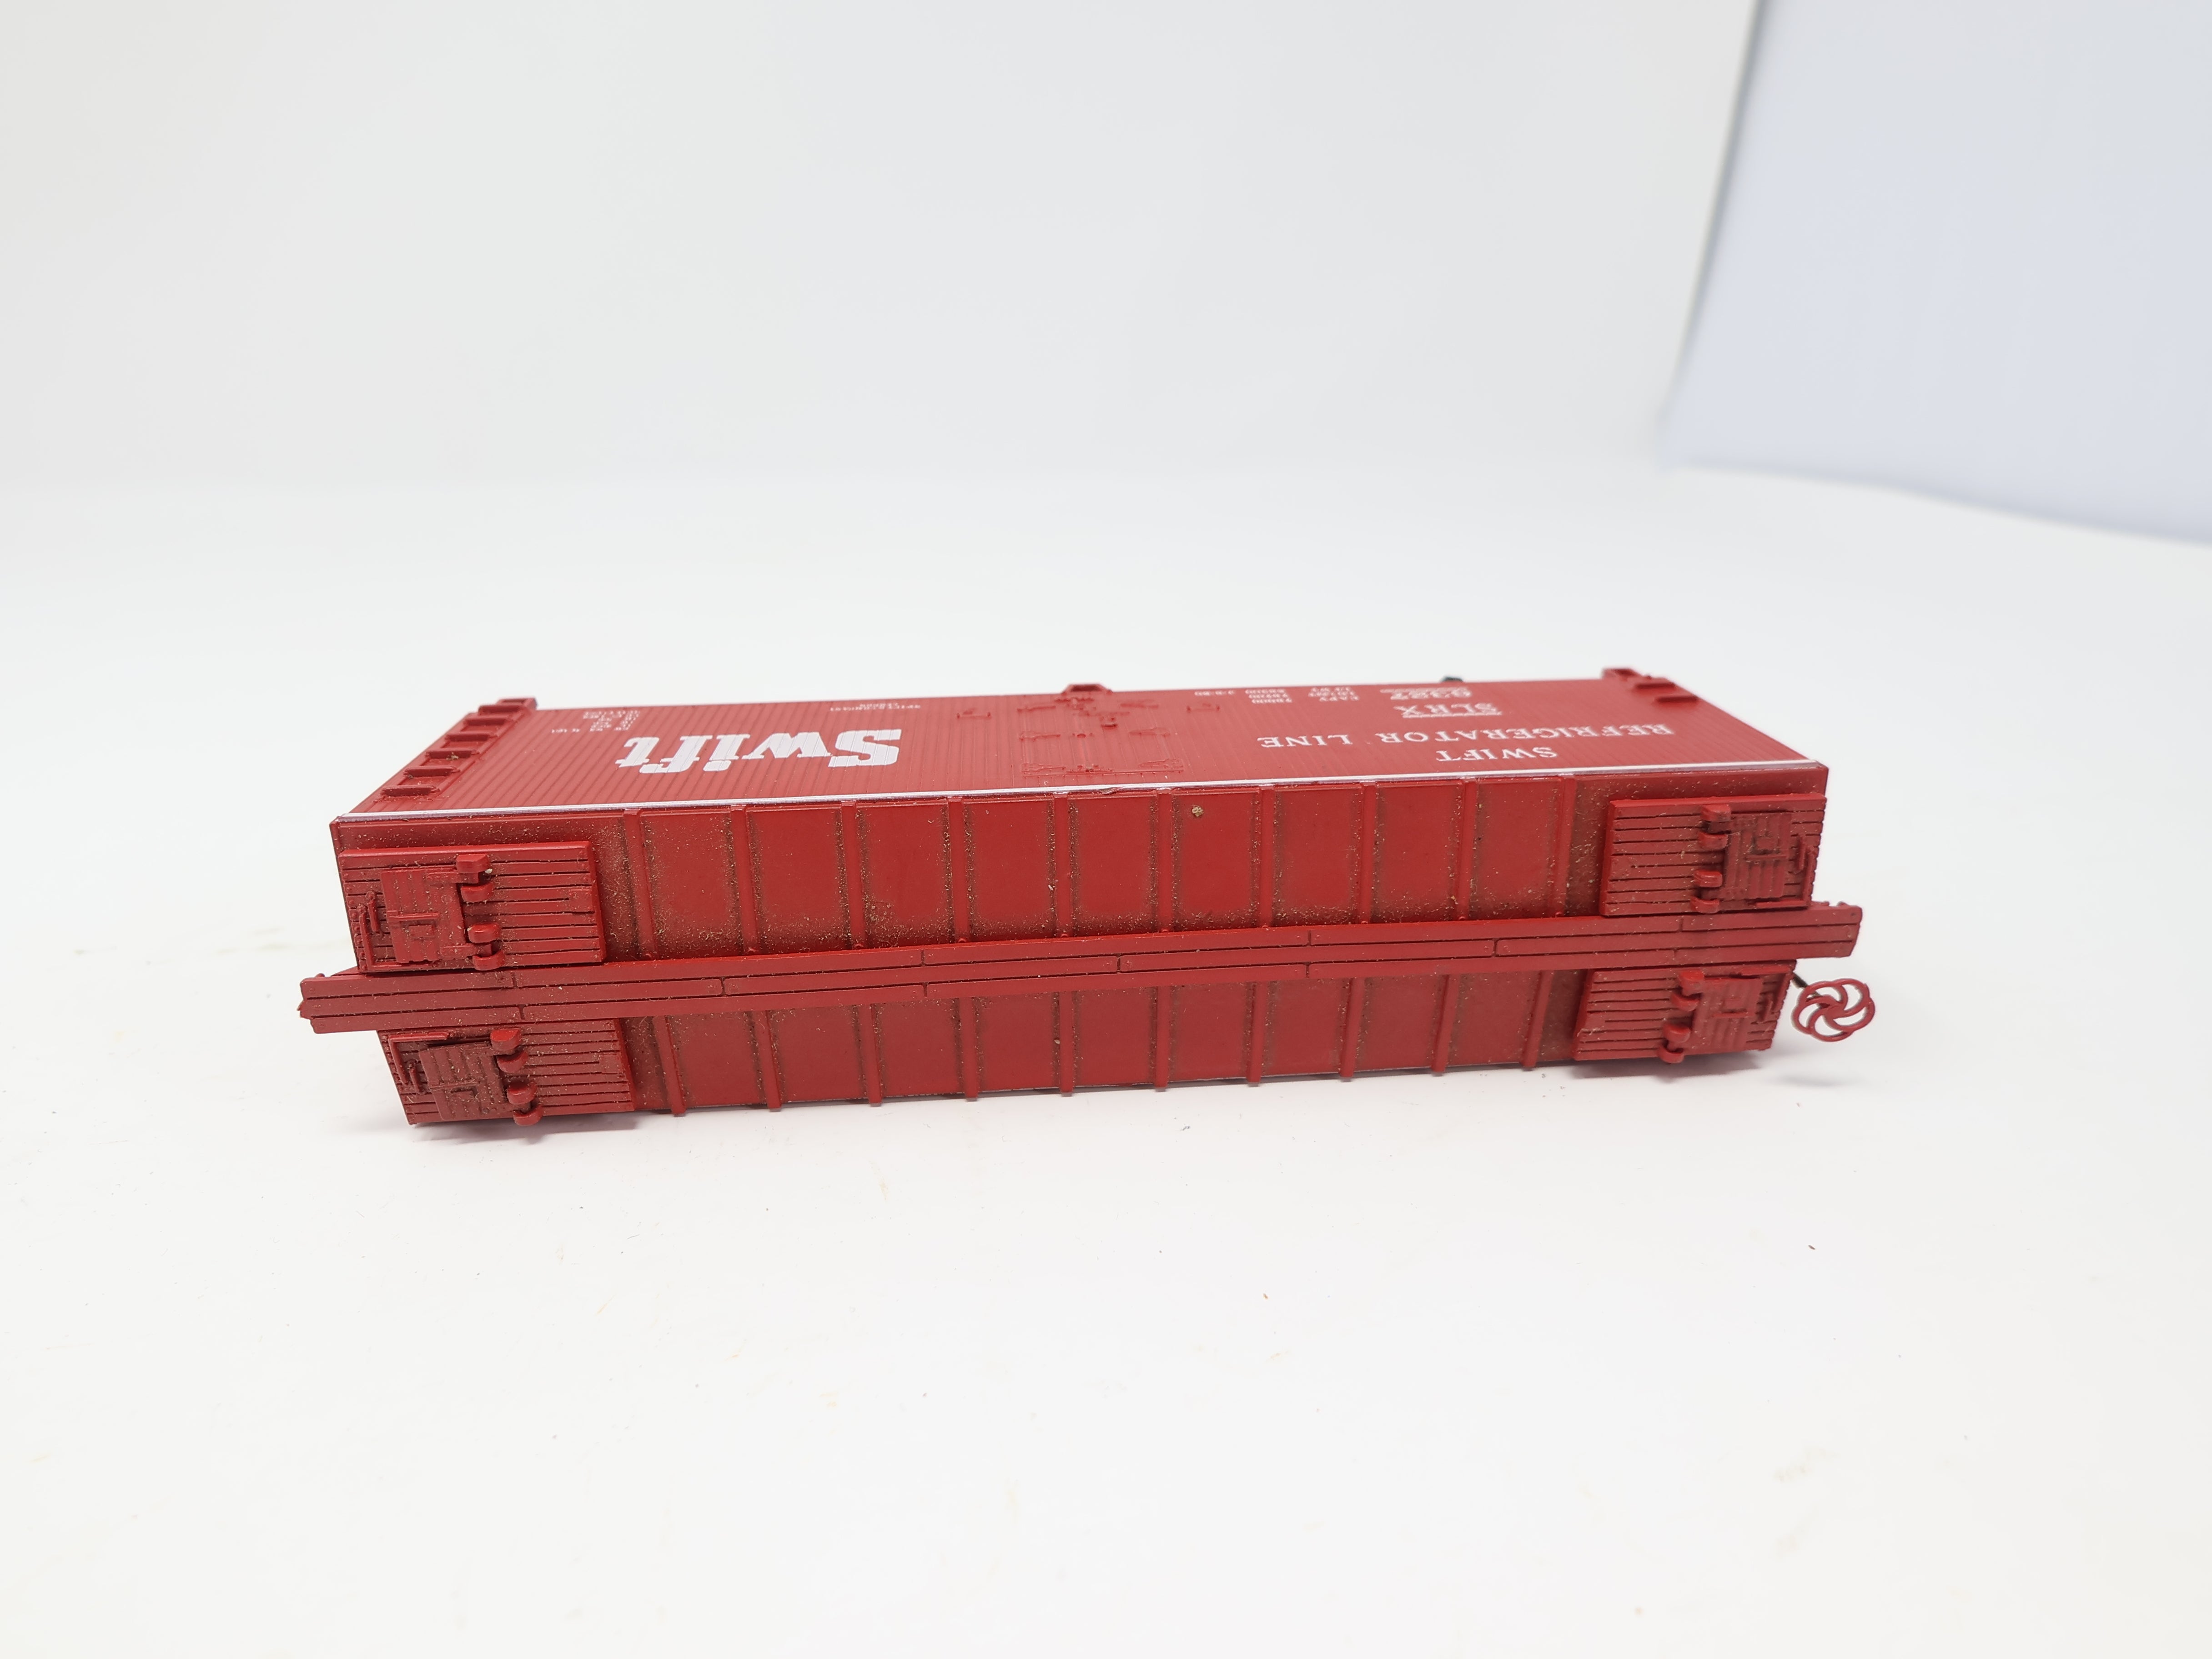 USED Walthers HO Scale, 40' Wooden Box Car, Swift Refrigerator Line SRLX #6327